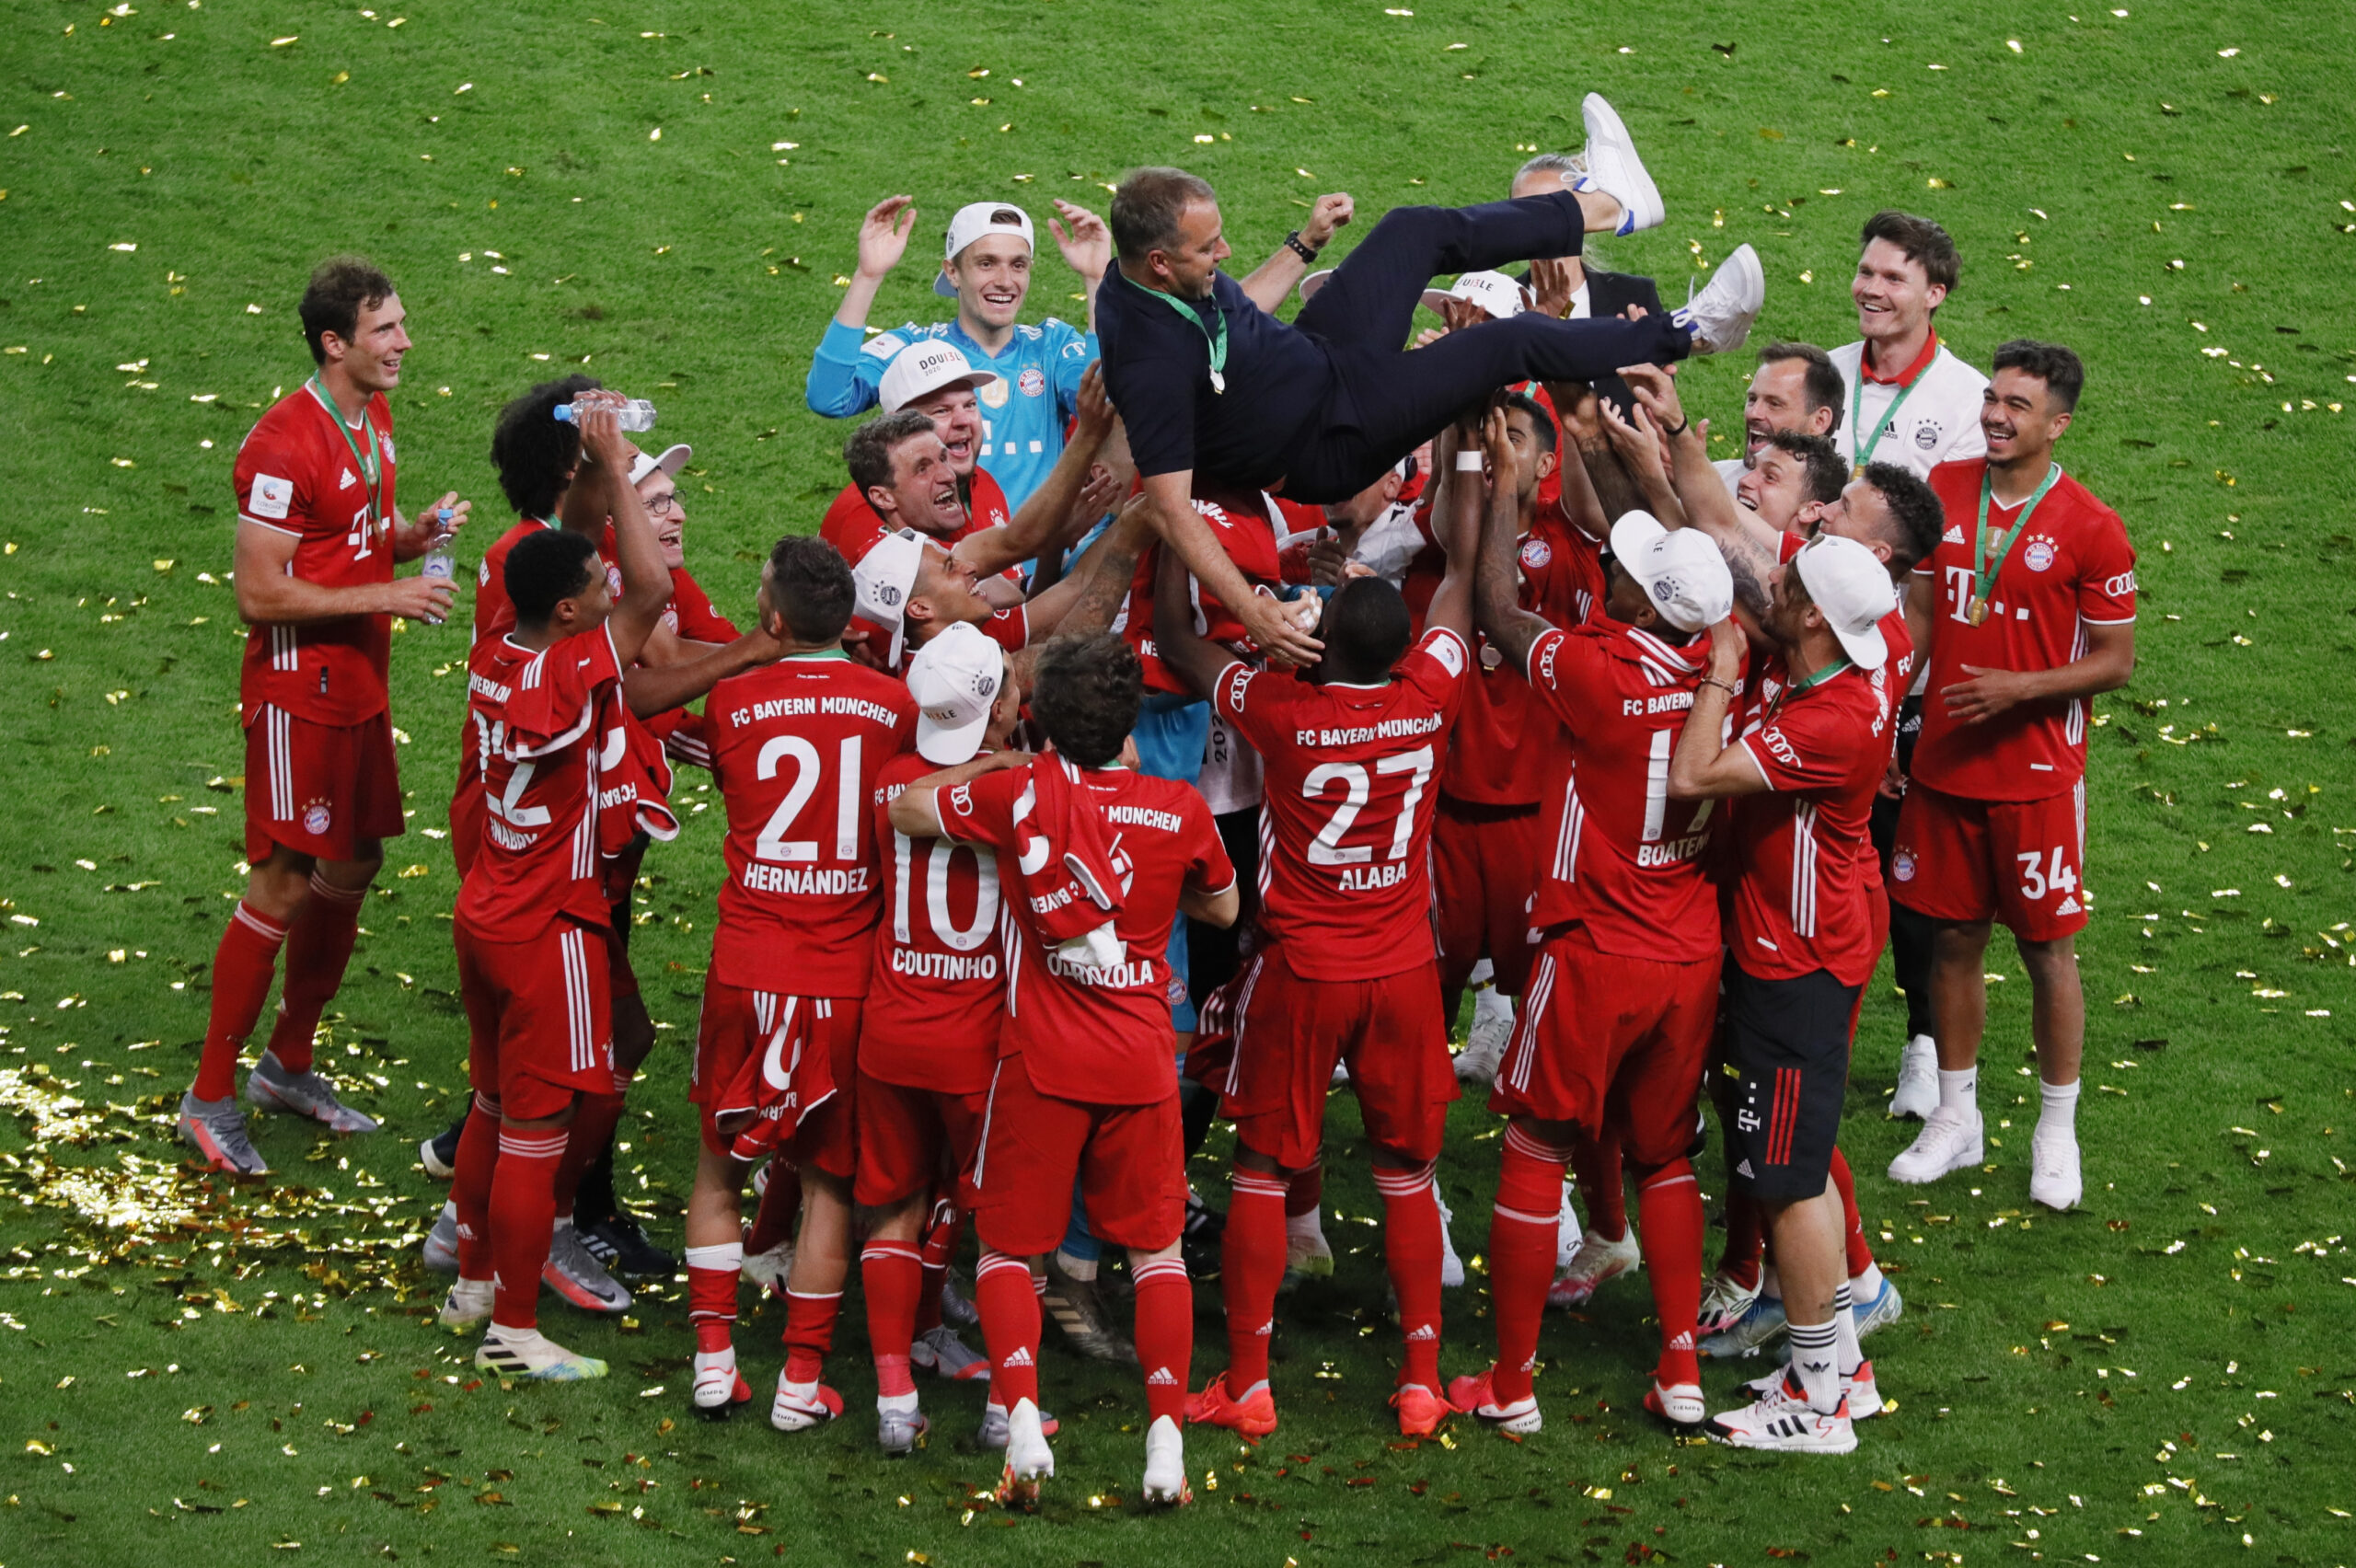 BERLIN, GERMANY - JULY 04: Hansi Flick, Manager of Bayern Munich is lifted in the air by his players during the DFB Cup final match between Bayer 04 Leverkusen and FC Bayern Muenchen at Olympiastadion on July 4, 2020 in Berlin, Germany.